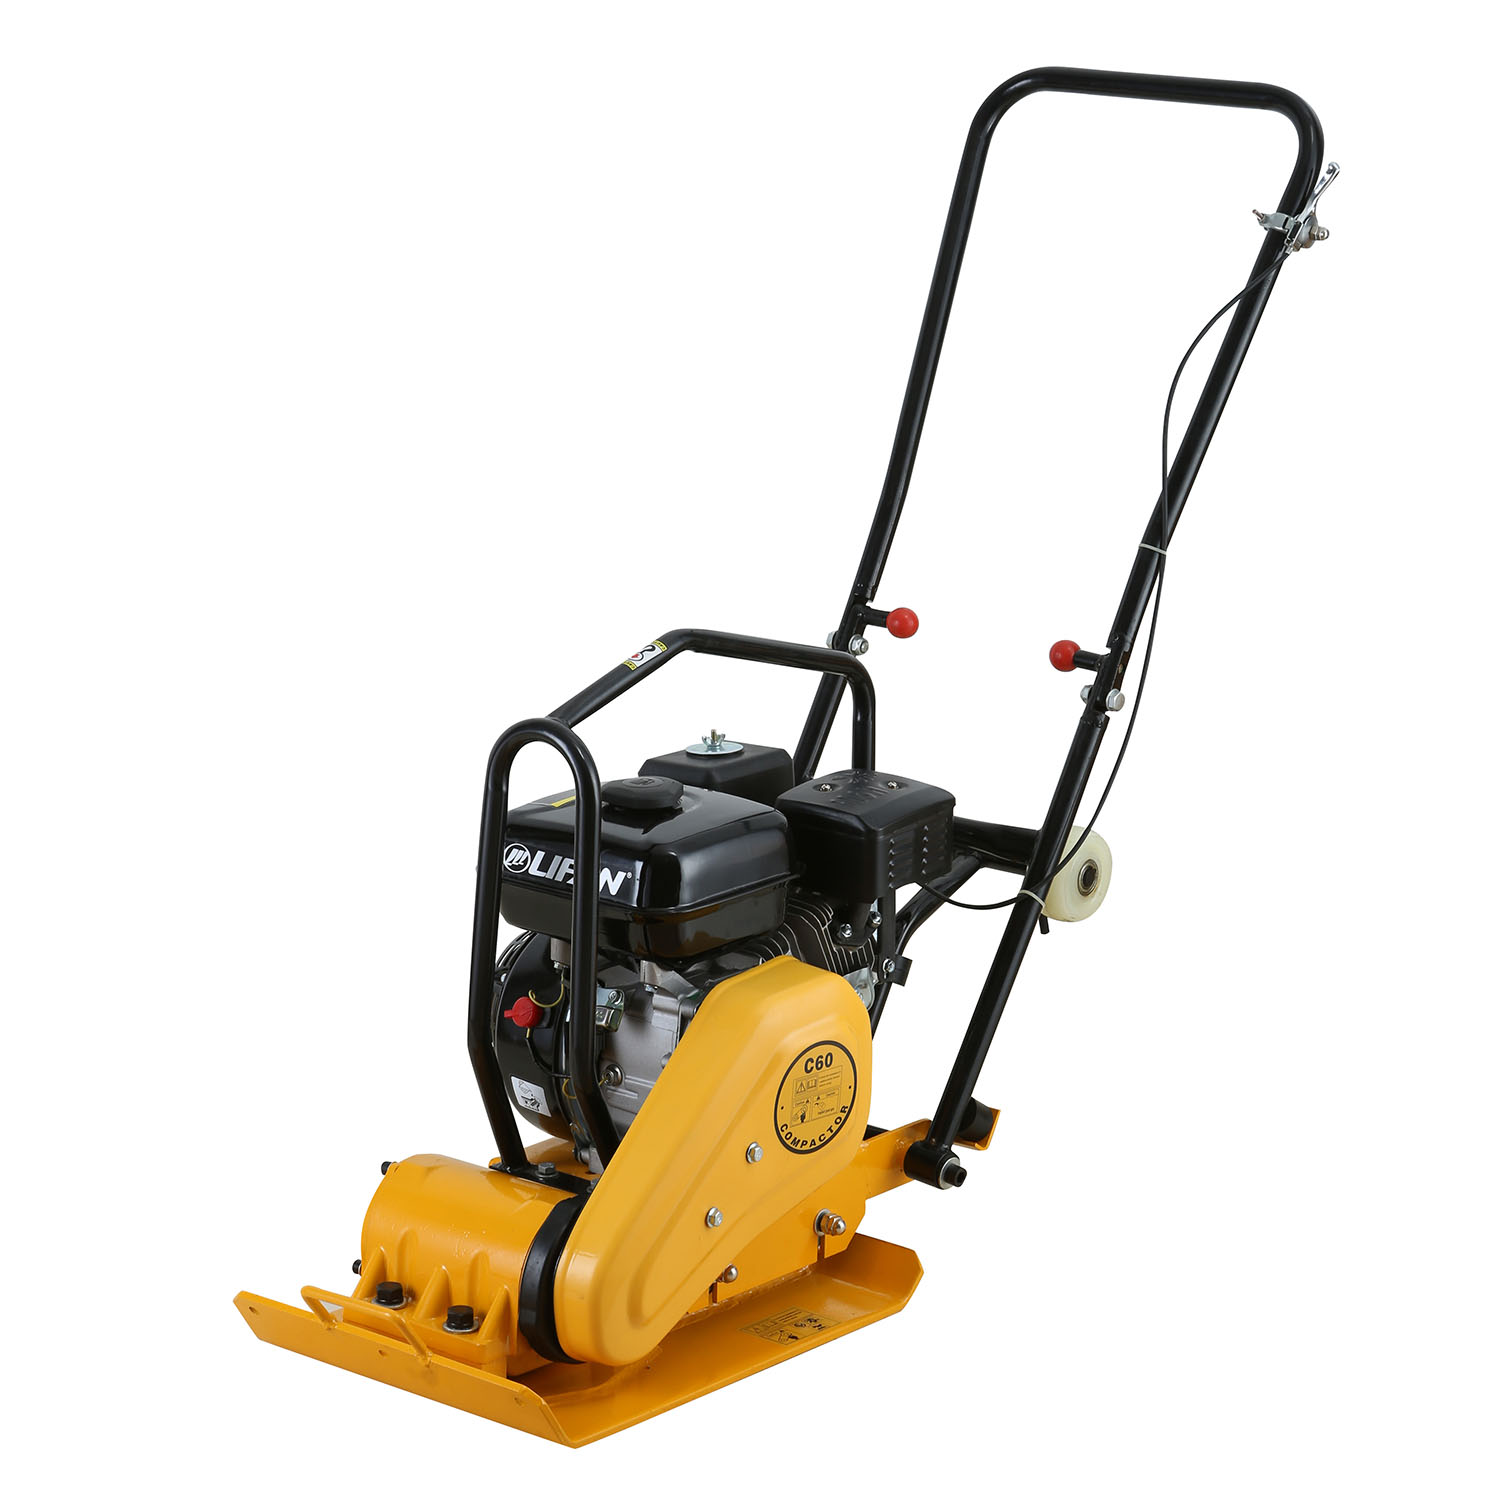 Top sell C-60 used wacker vibrating plate compactor for sale